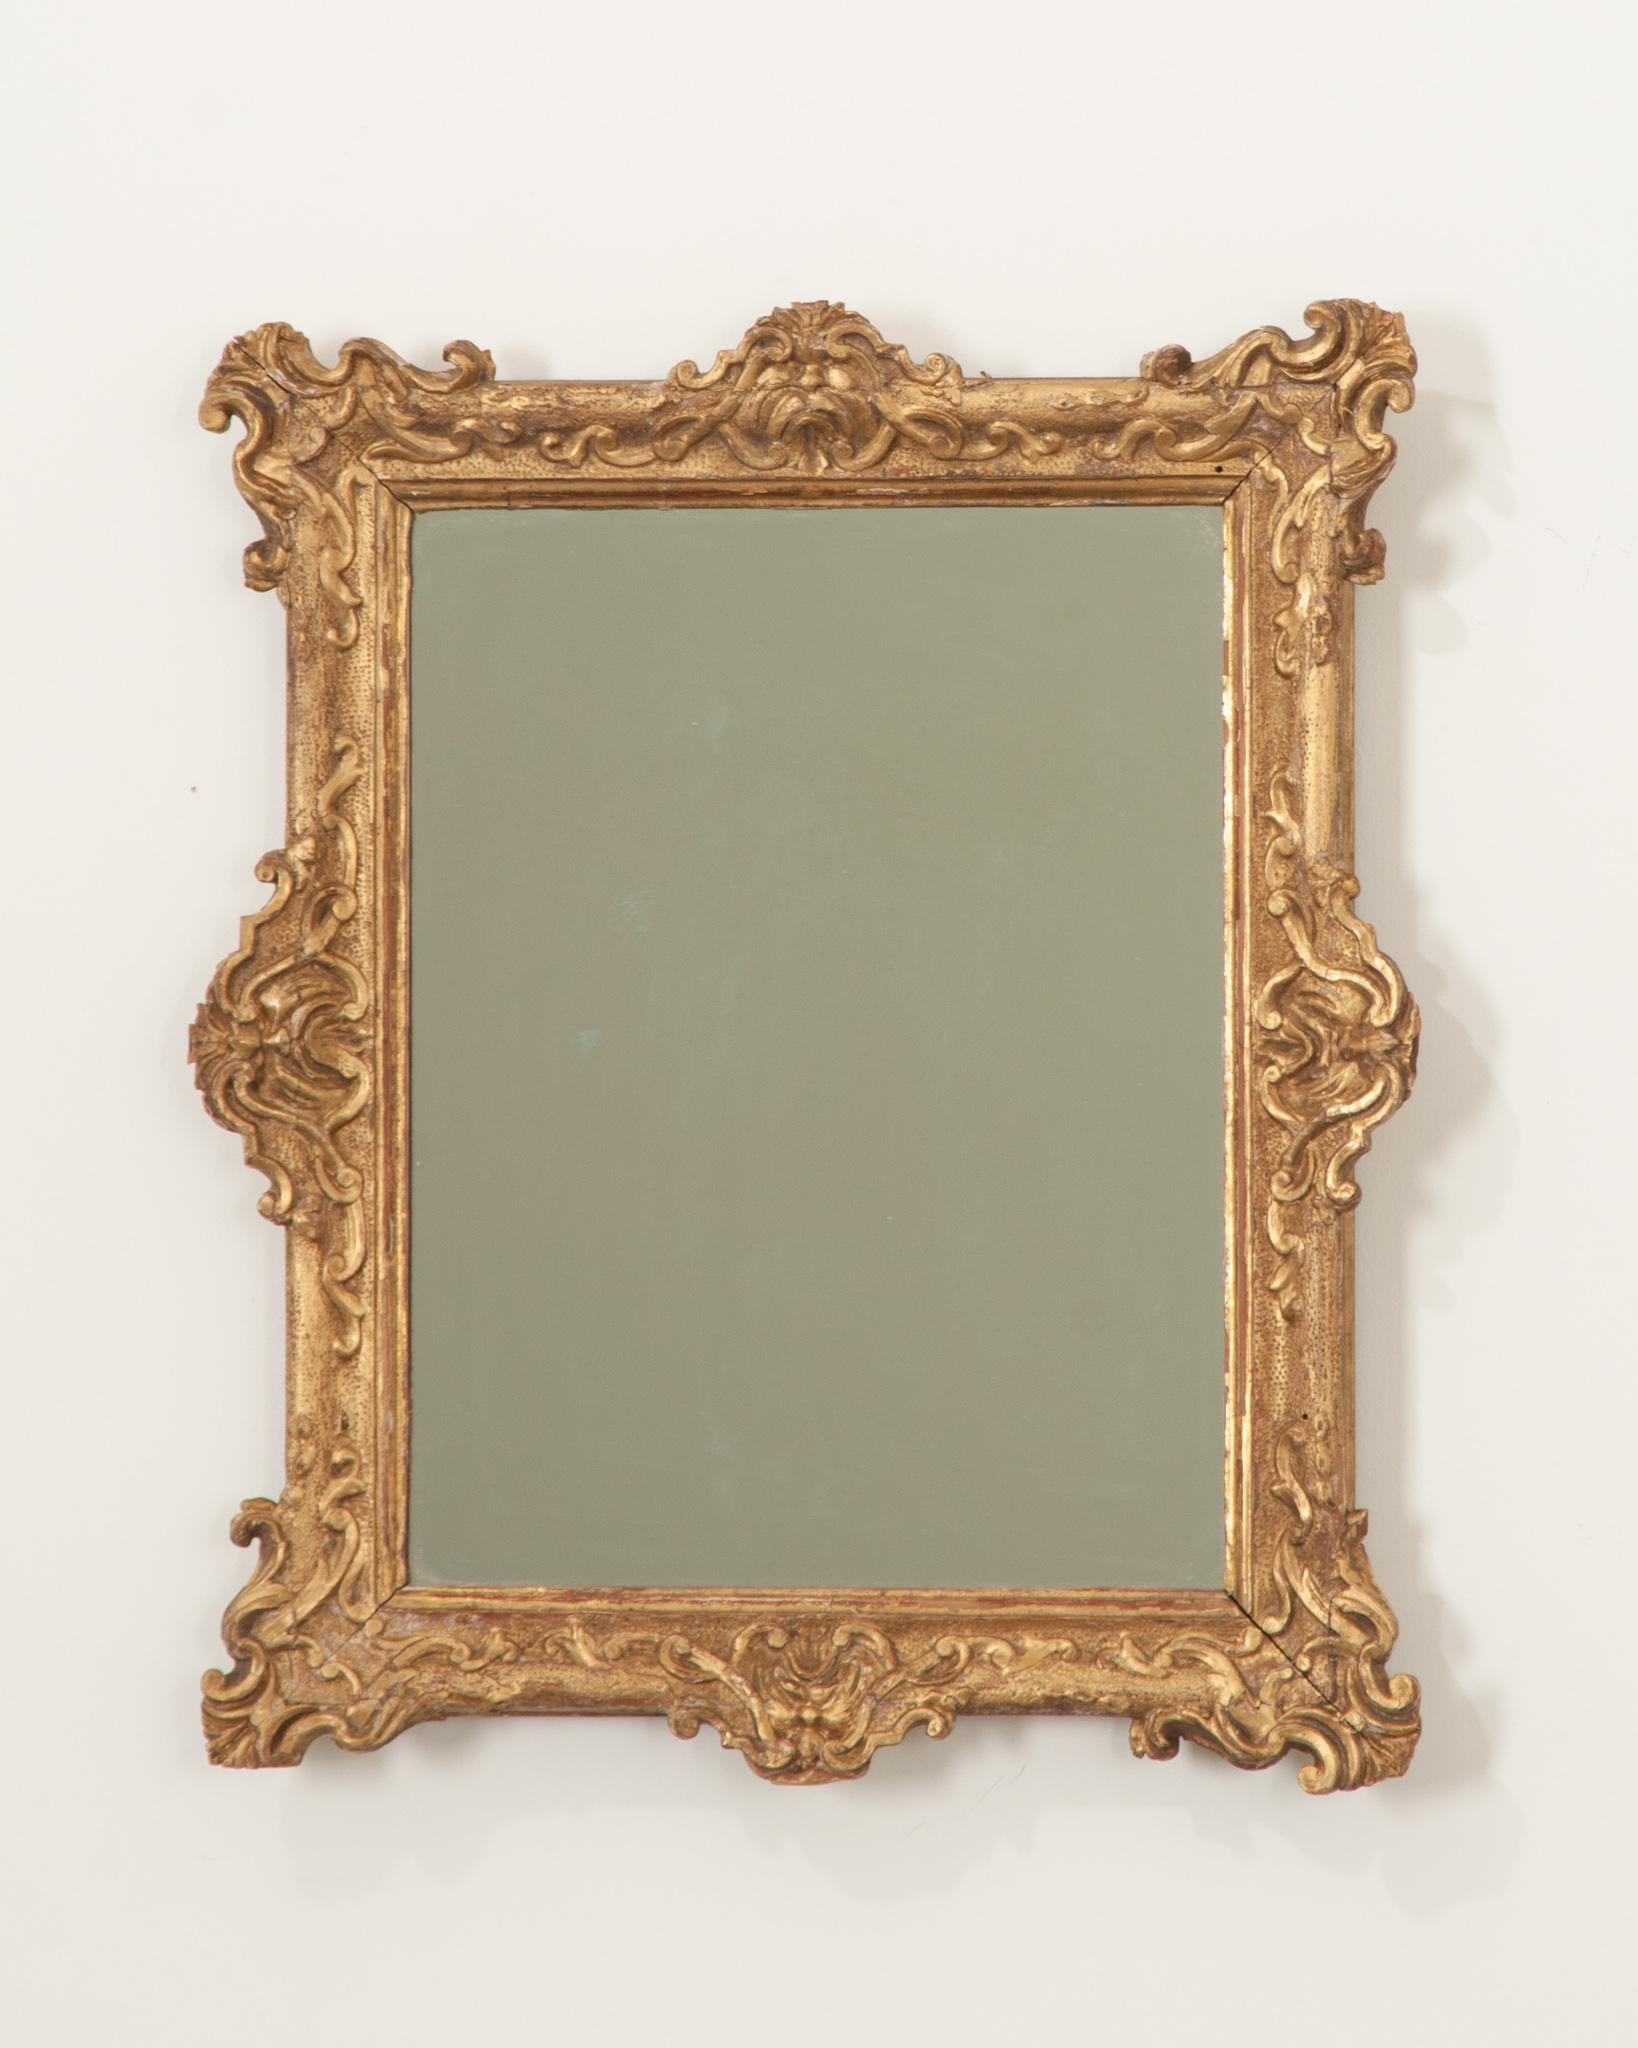 This darling Napoleon IV gold gilt mirror is the perfect accent in any space. The highly decorative frame has gained a wonderful patina and houses a new mirror plate. Ready to be hung- the back is already fixed with a bracket. Make sure to view the